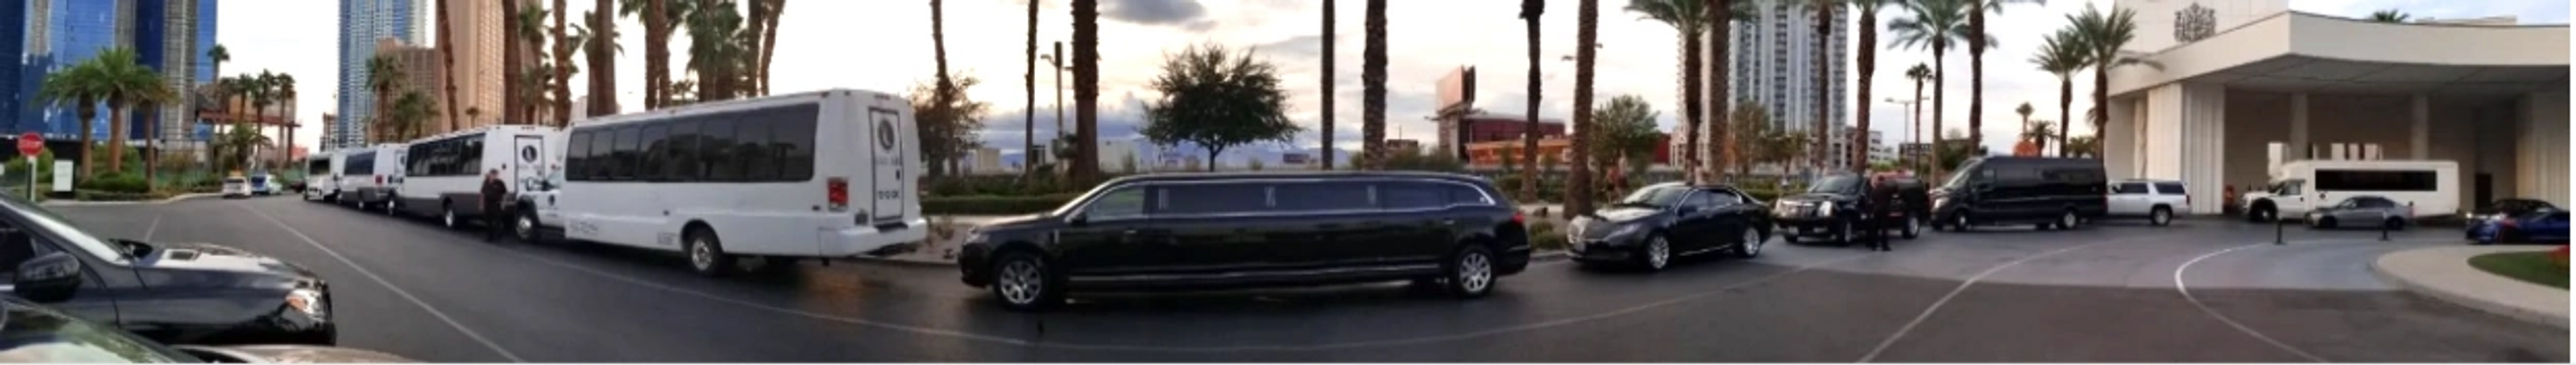 Lucky Limousine offering variety kinds of vehicles for your transportation needs in Las Vegas.